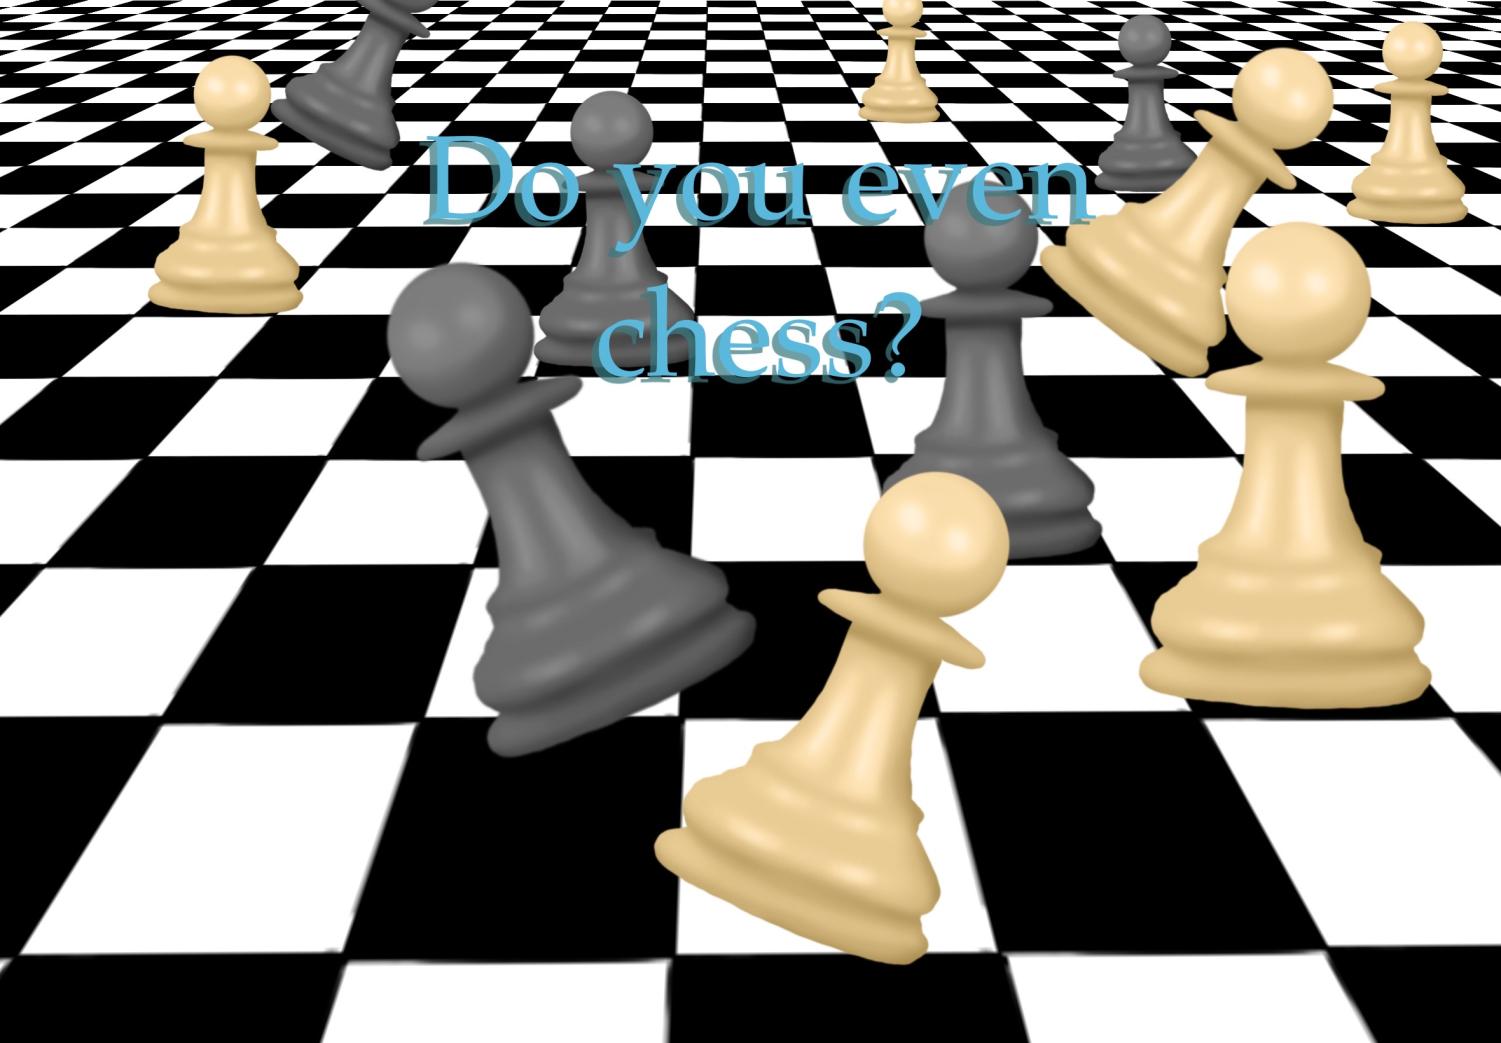 Windows On Windows on X: Chess Titans is a chess game introduced